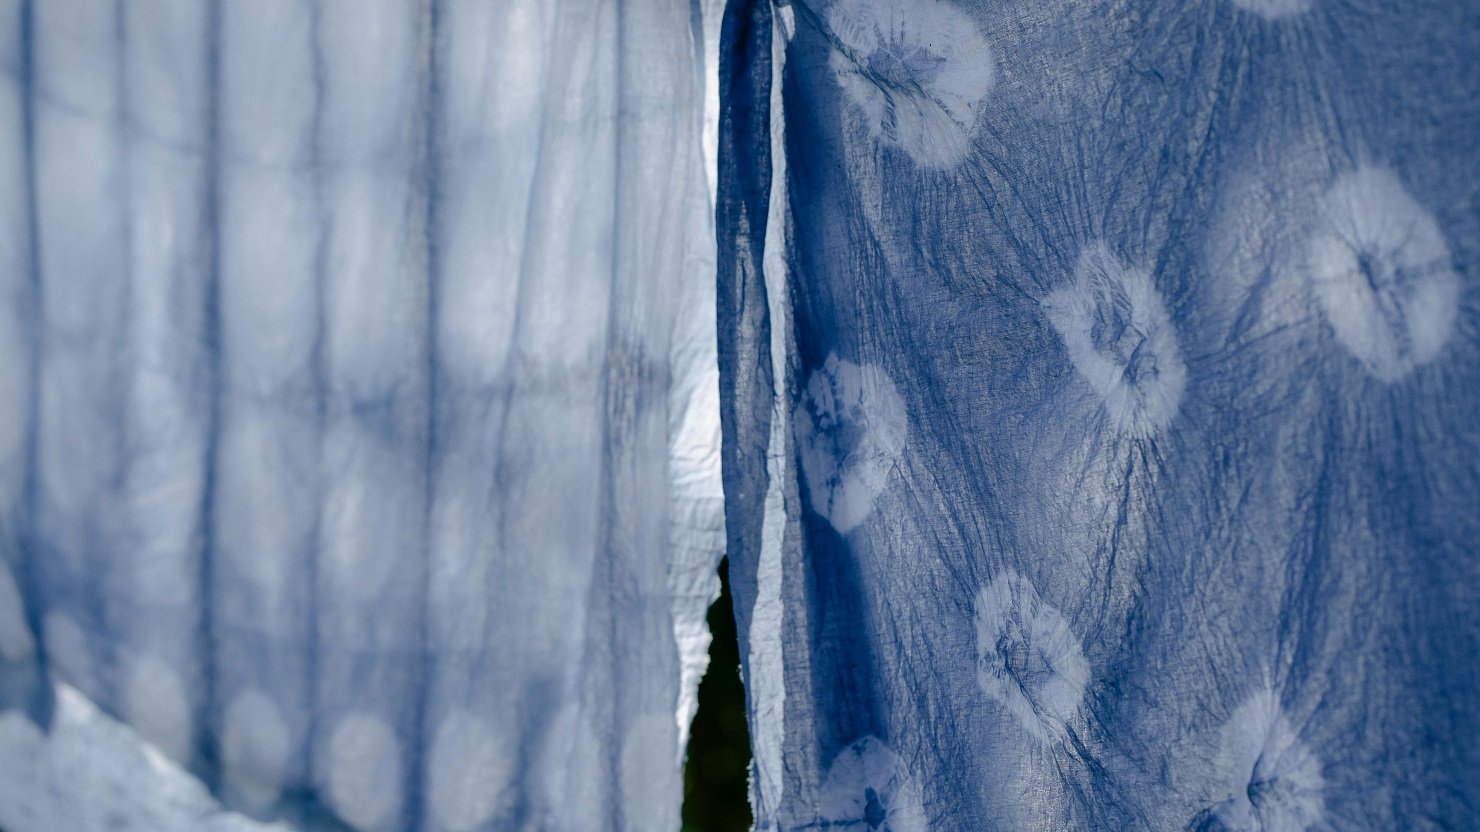 Two different pieces of blue and white tie-dyed fabric